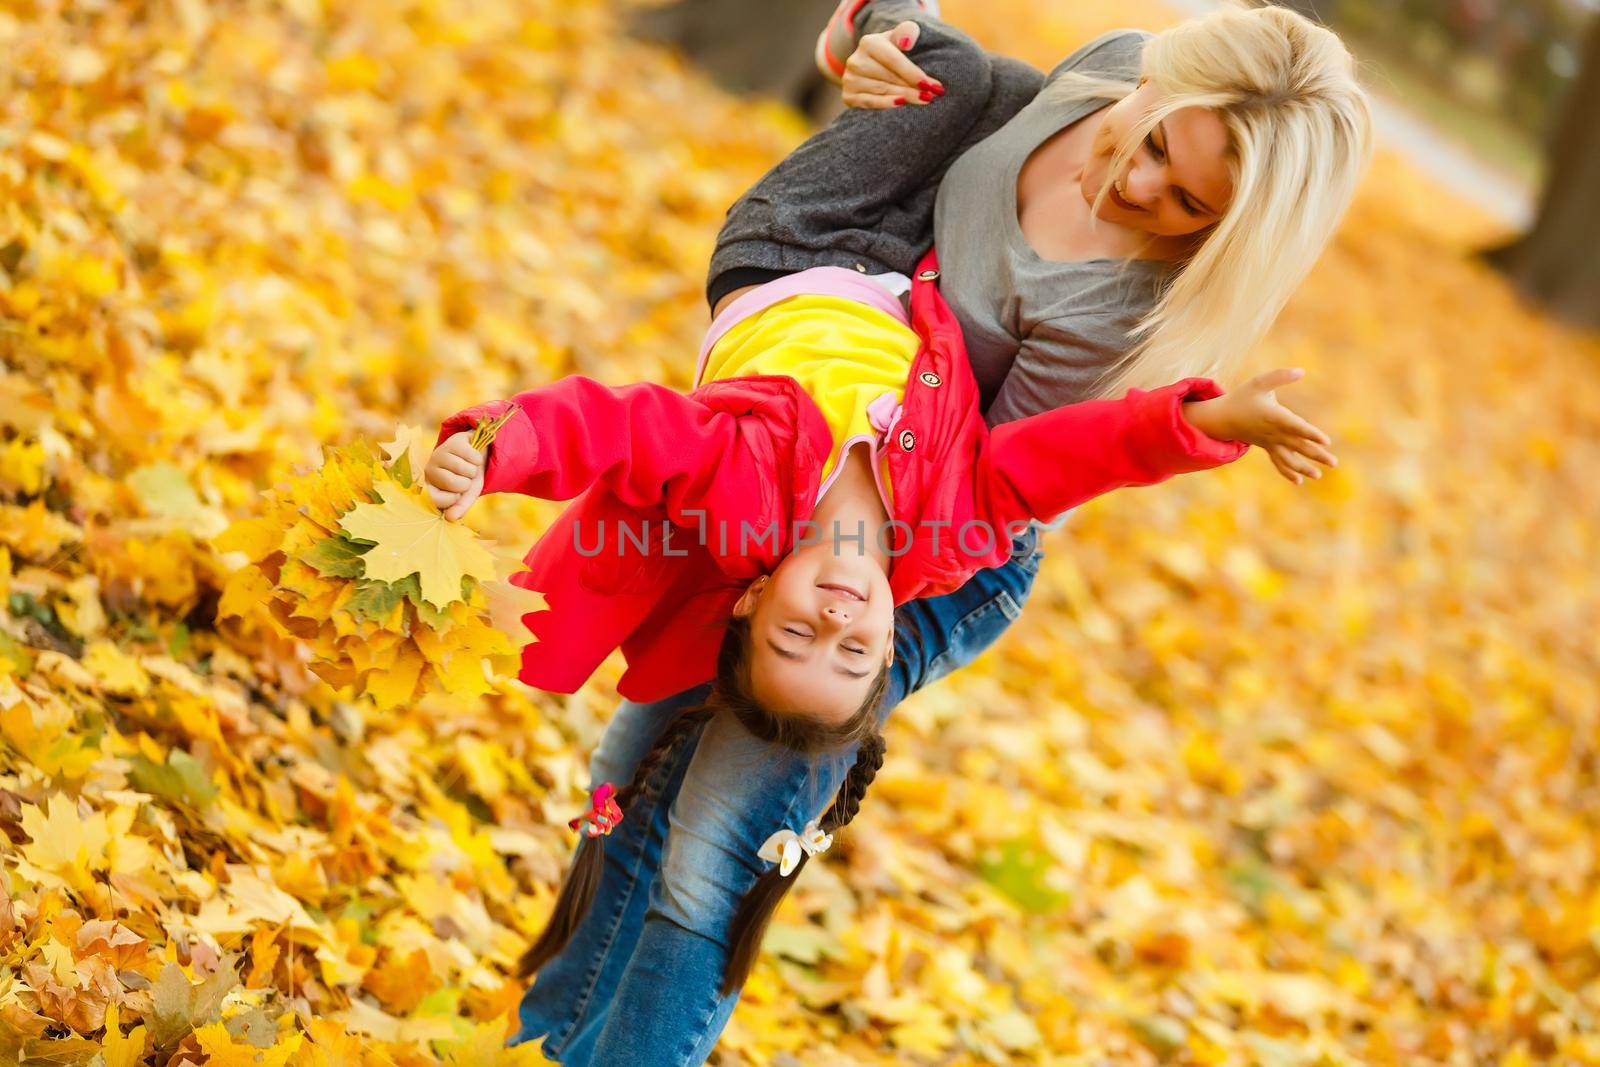 Happy family: mother and child little daughter play cuddling on autumn walk in nature outdoors